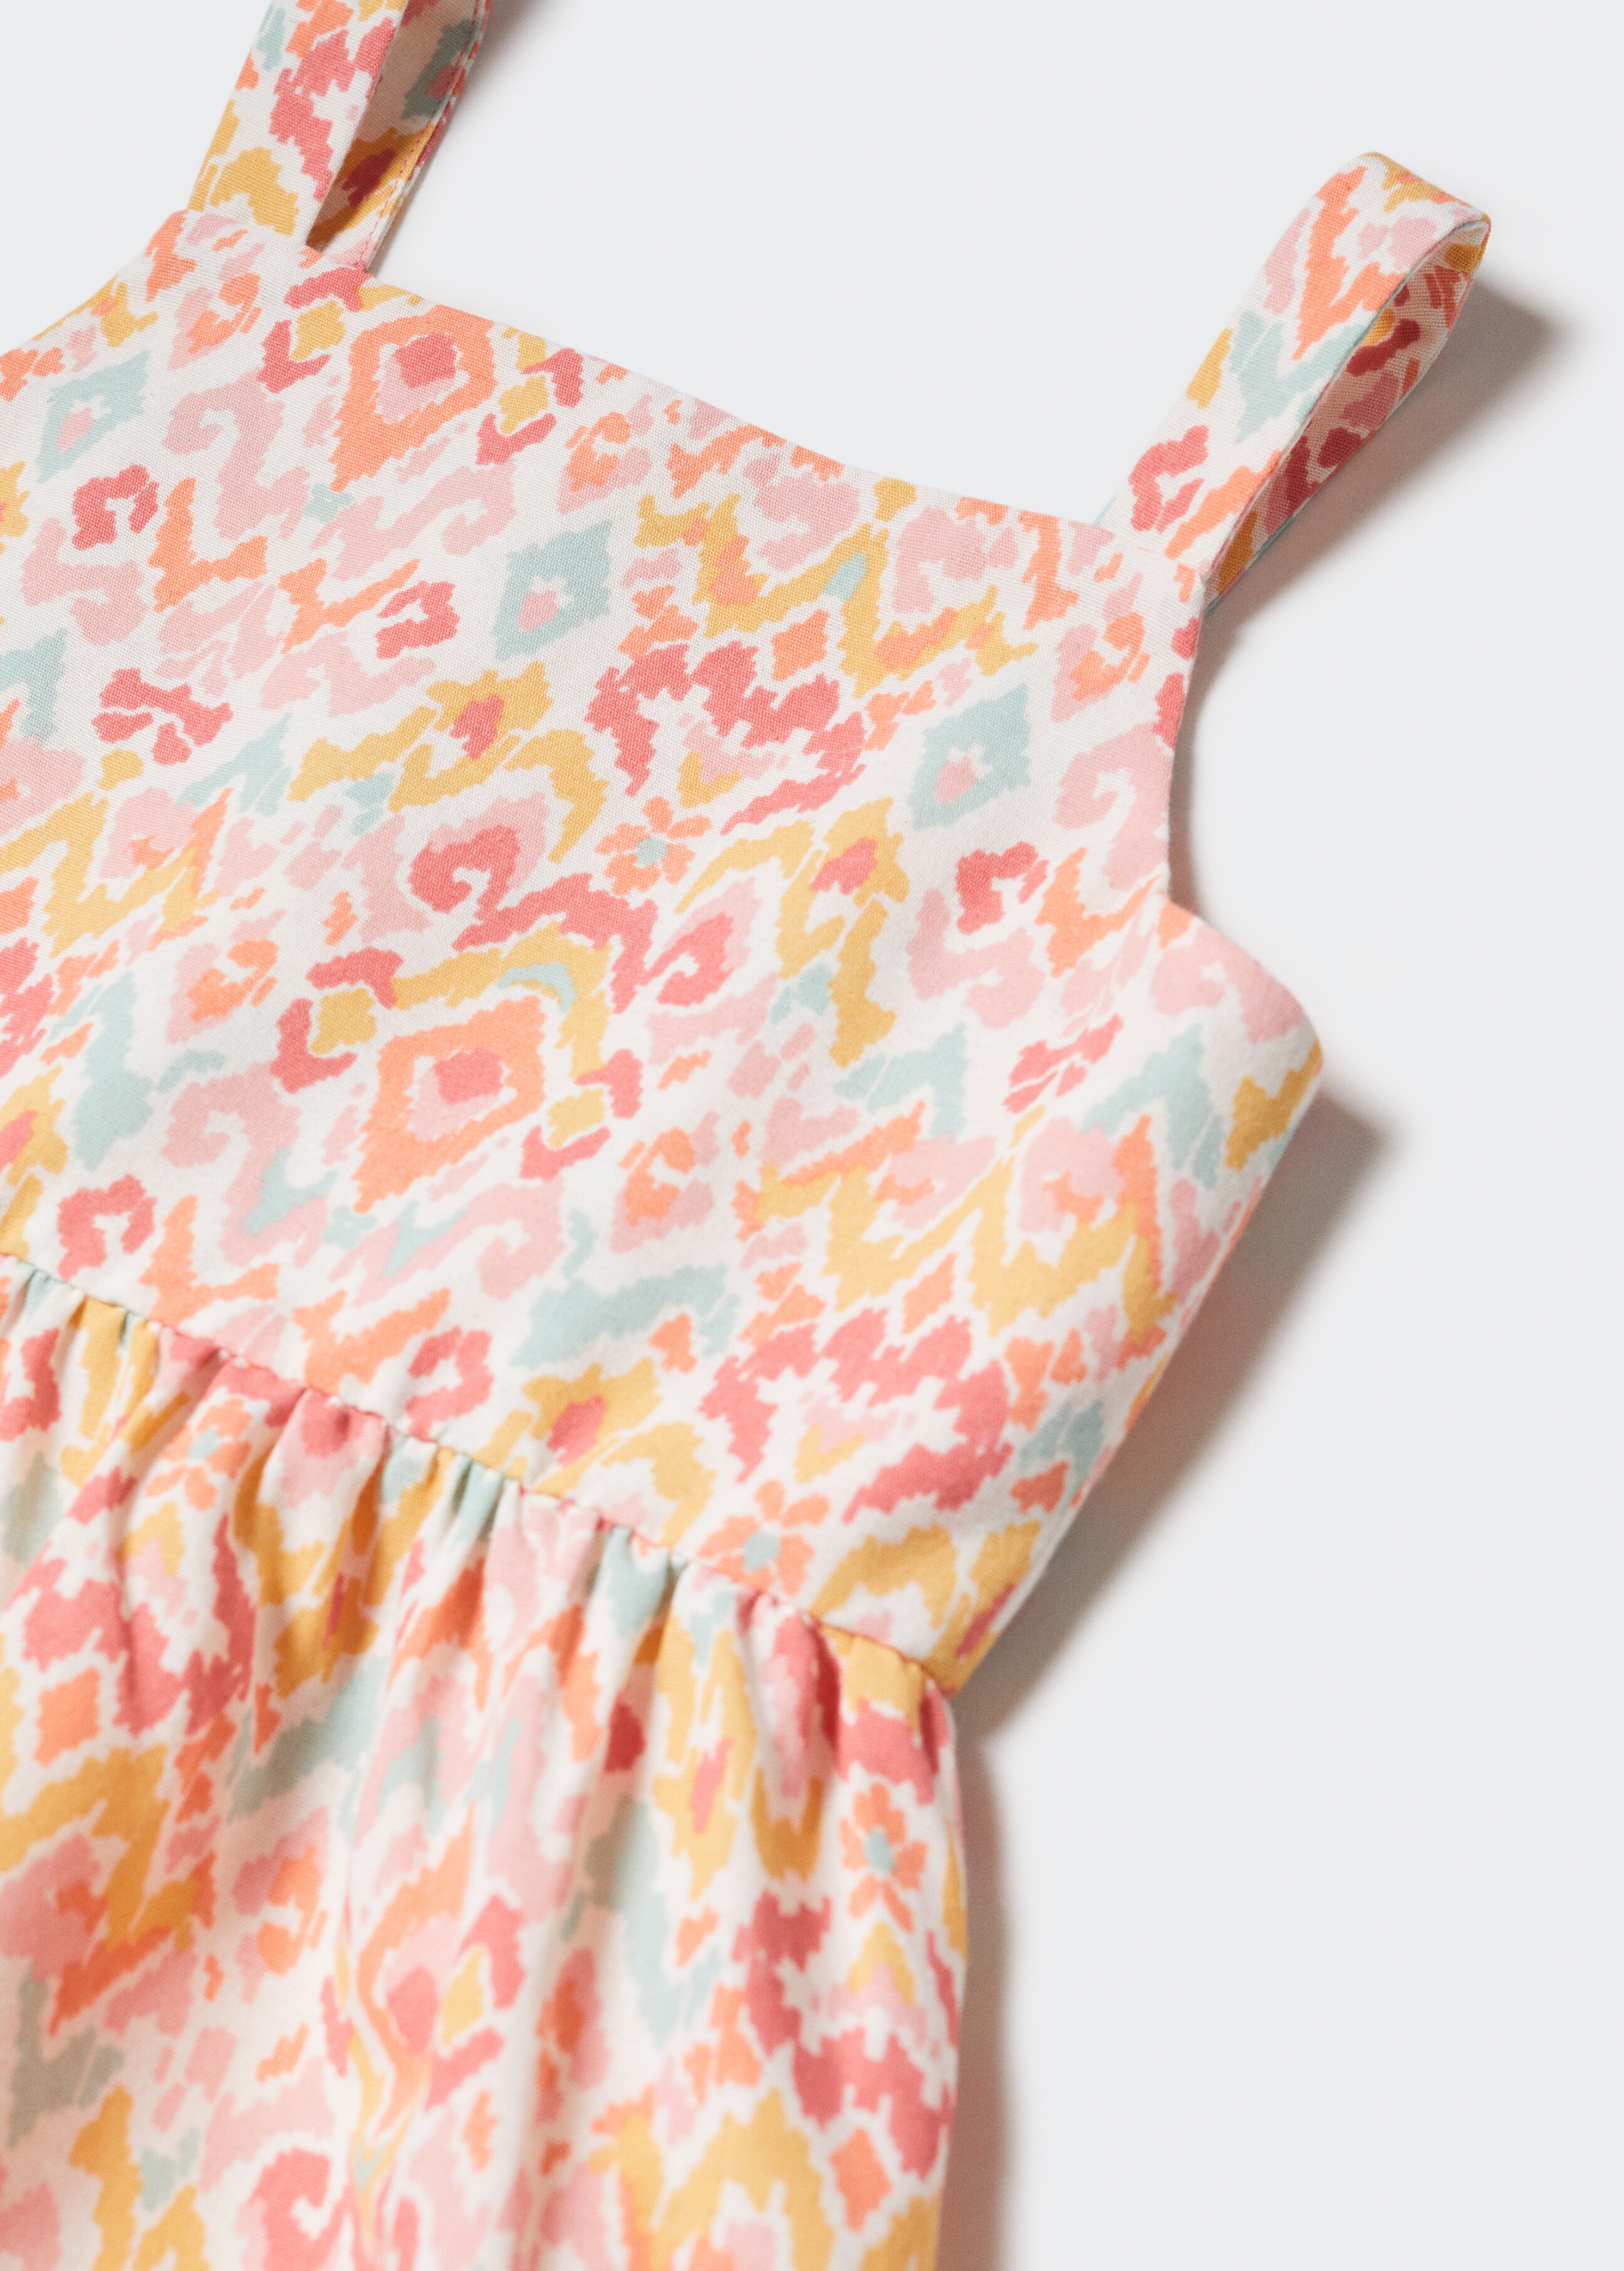 Printed dress - Details of the article 8